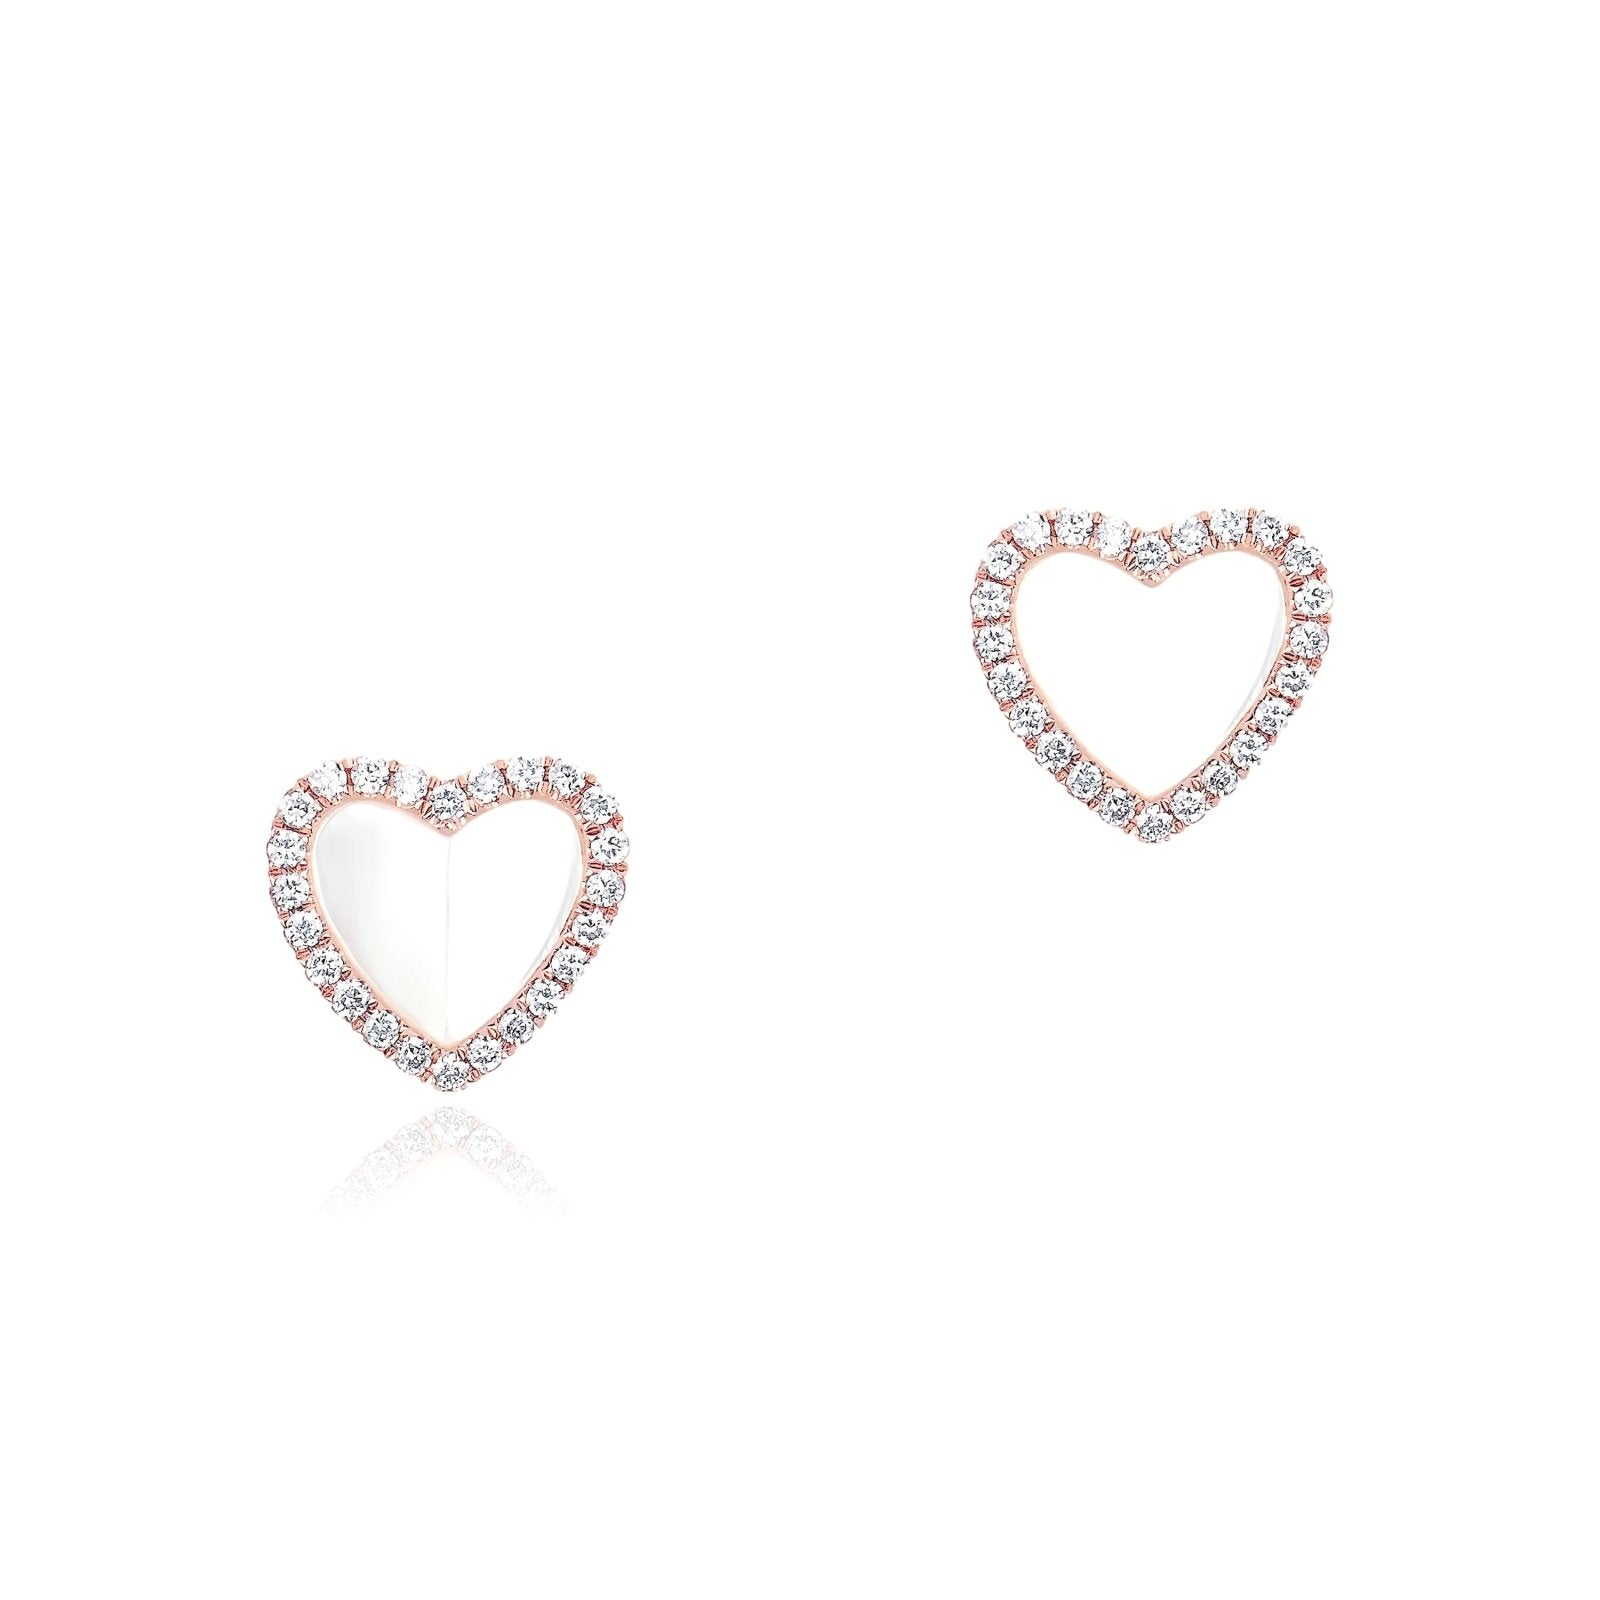 Mother of Pearl Heart with Diamond Halo Earrings Earrings Estella Collection 17214 14k Birthstone Diamond #tag4# #tag5# #tag6# #tag7# #tag8# #tag9# #tag10# 14K Rose Gold